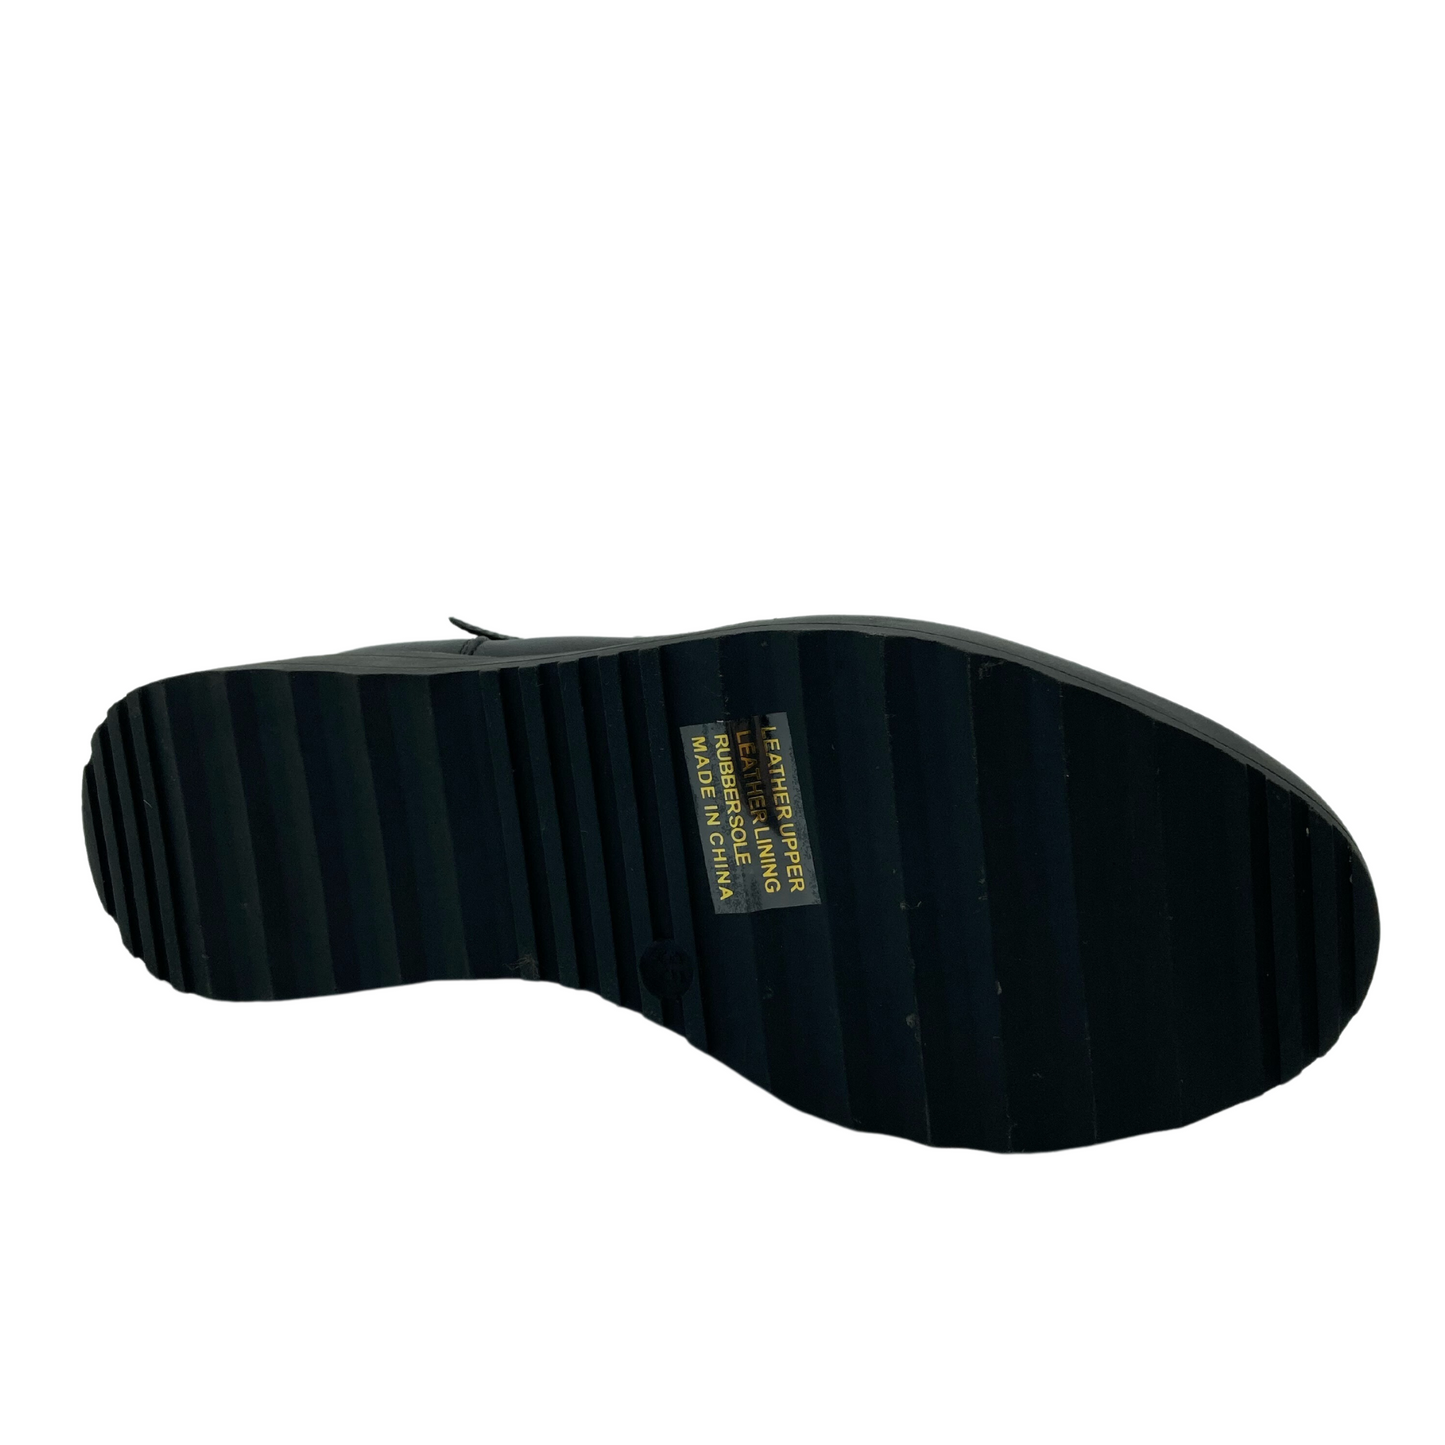 Bottom view of platform boot with black rubber sole